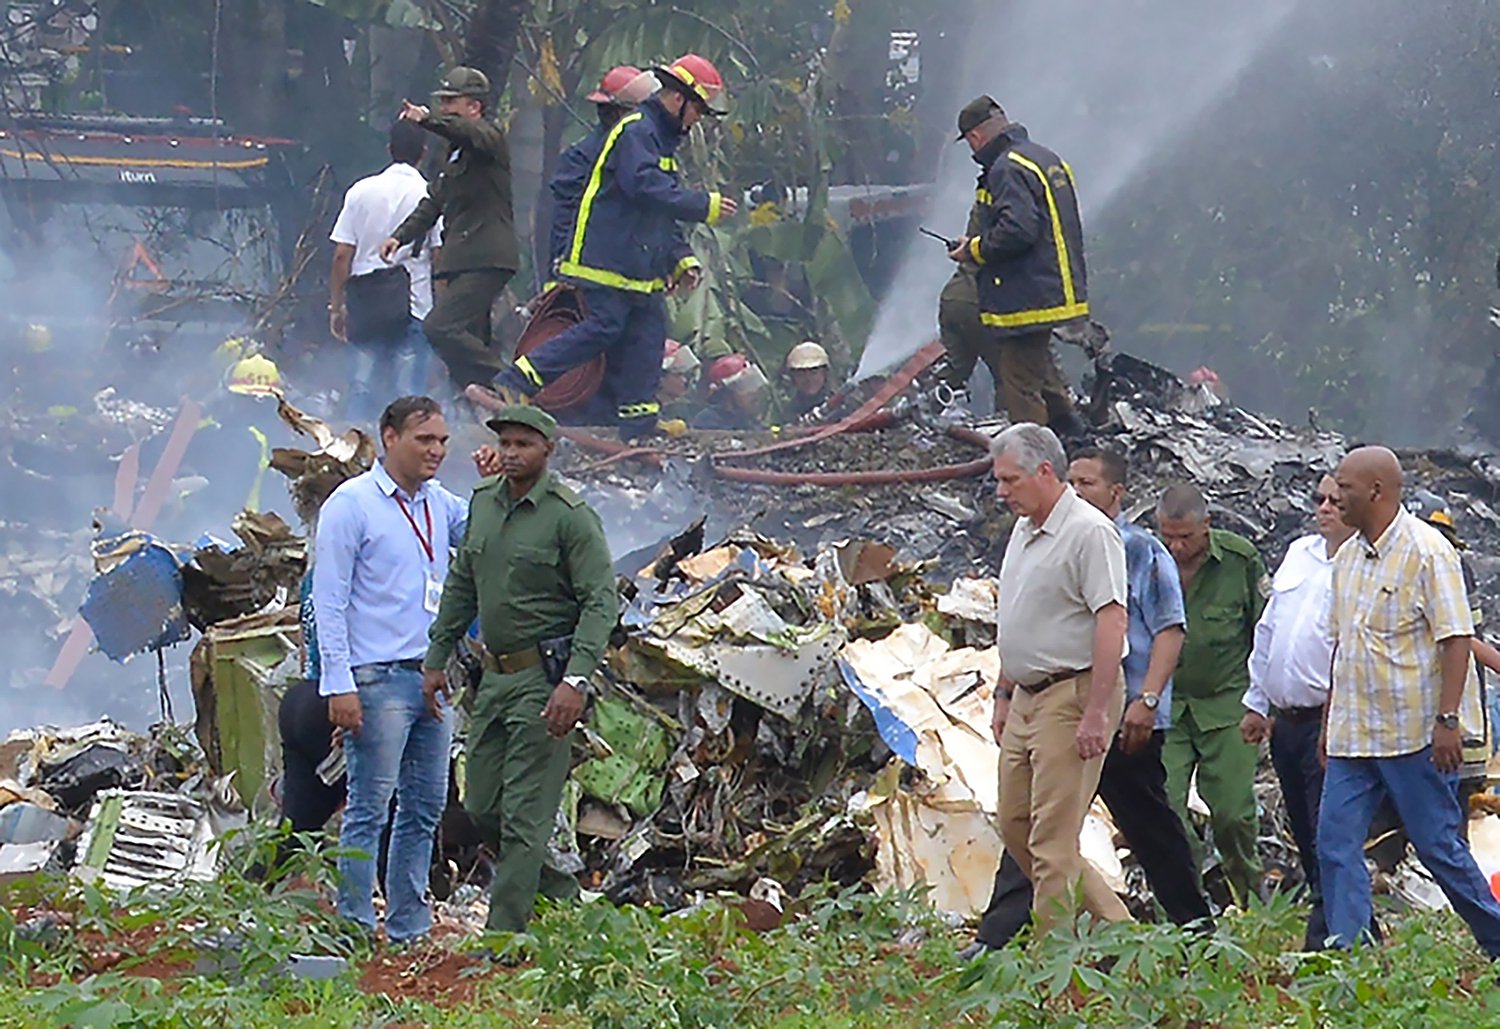 Cuban President Miguel Diaz-Canel (2-R, in khaki) is pictured at the site of the accident after a Cubana de Aviacion aircraft crashed after taking off from Havana